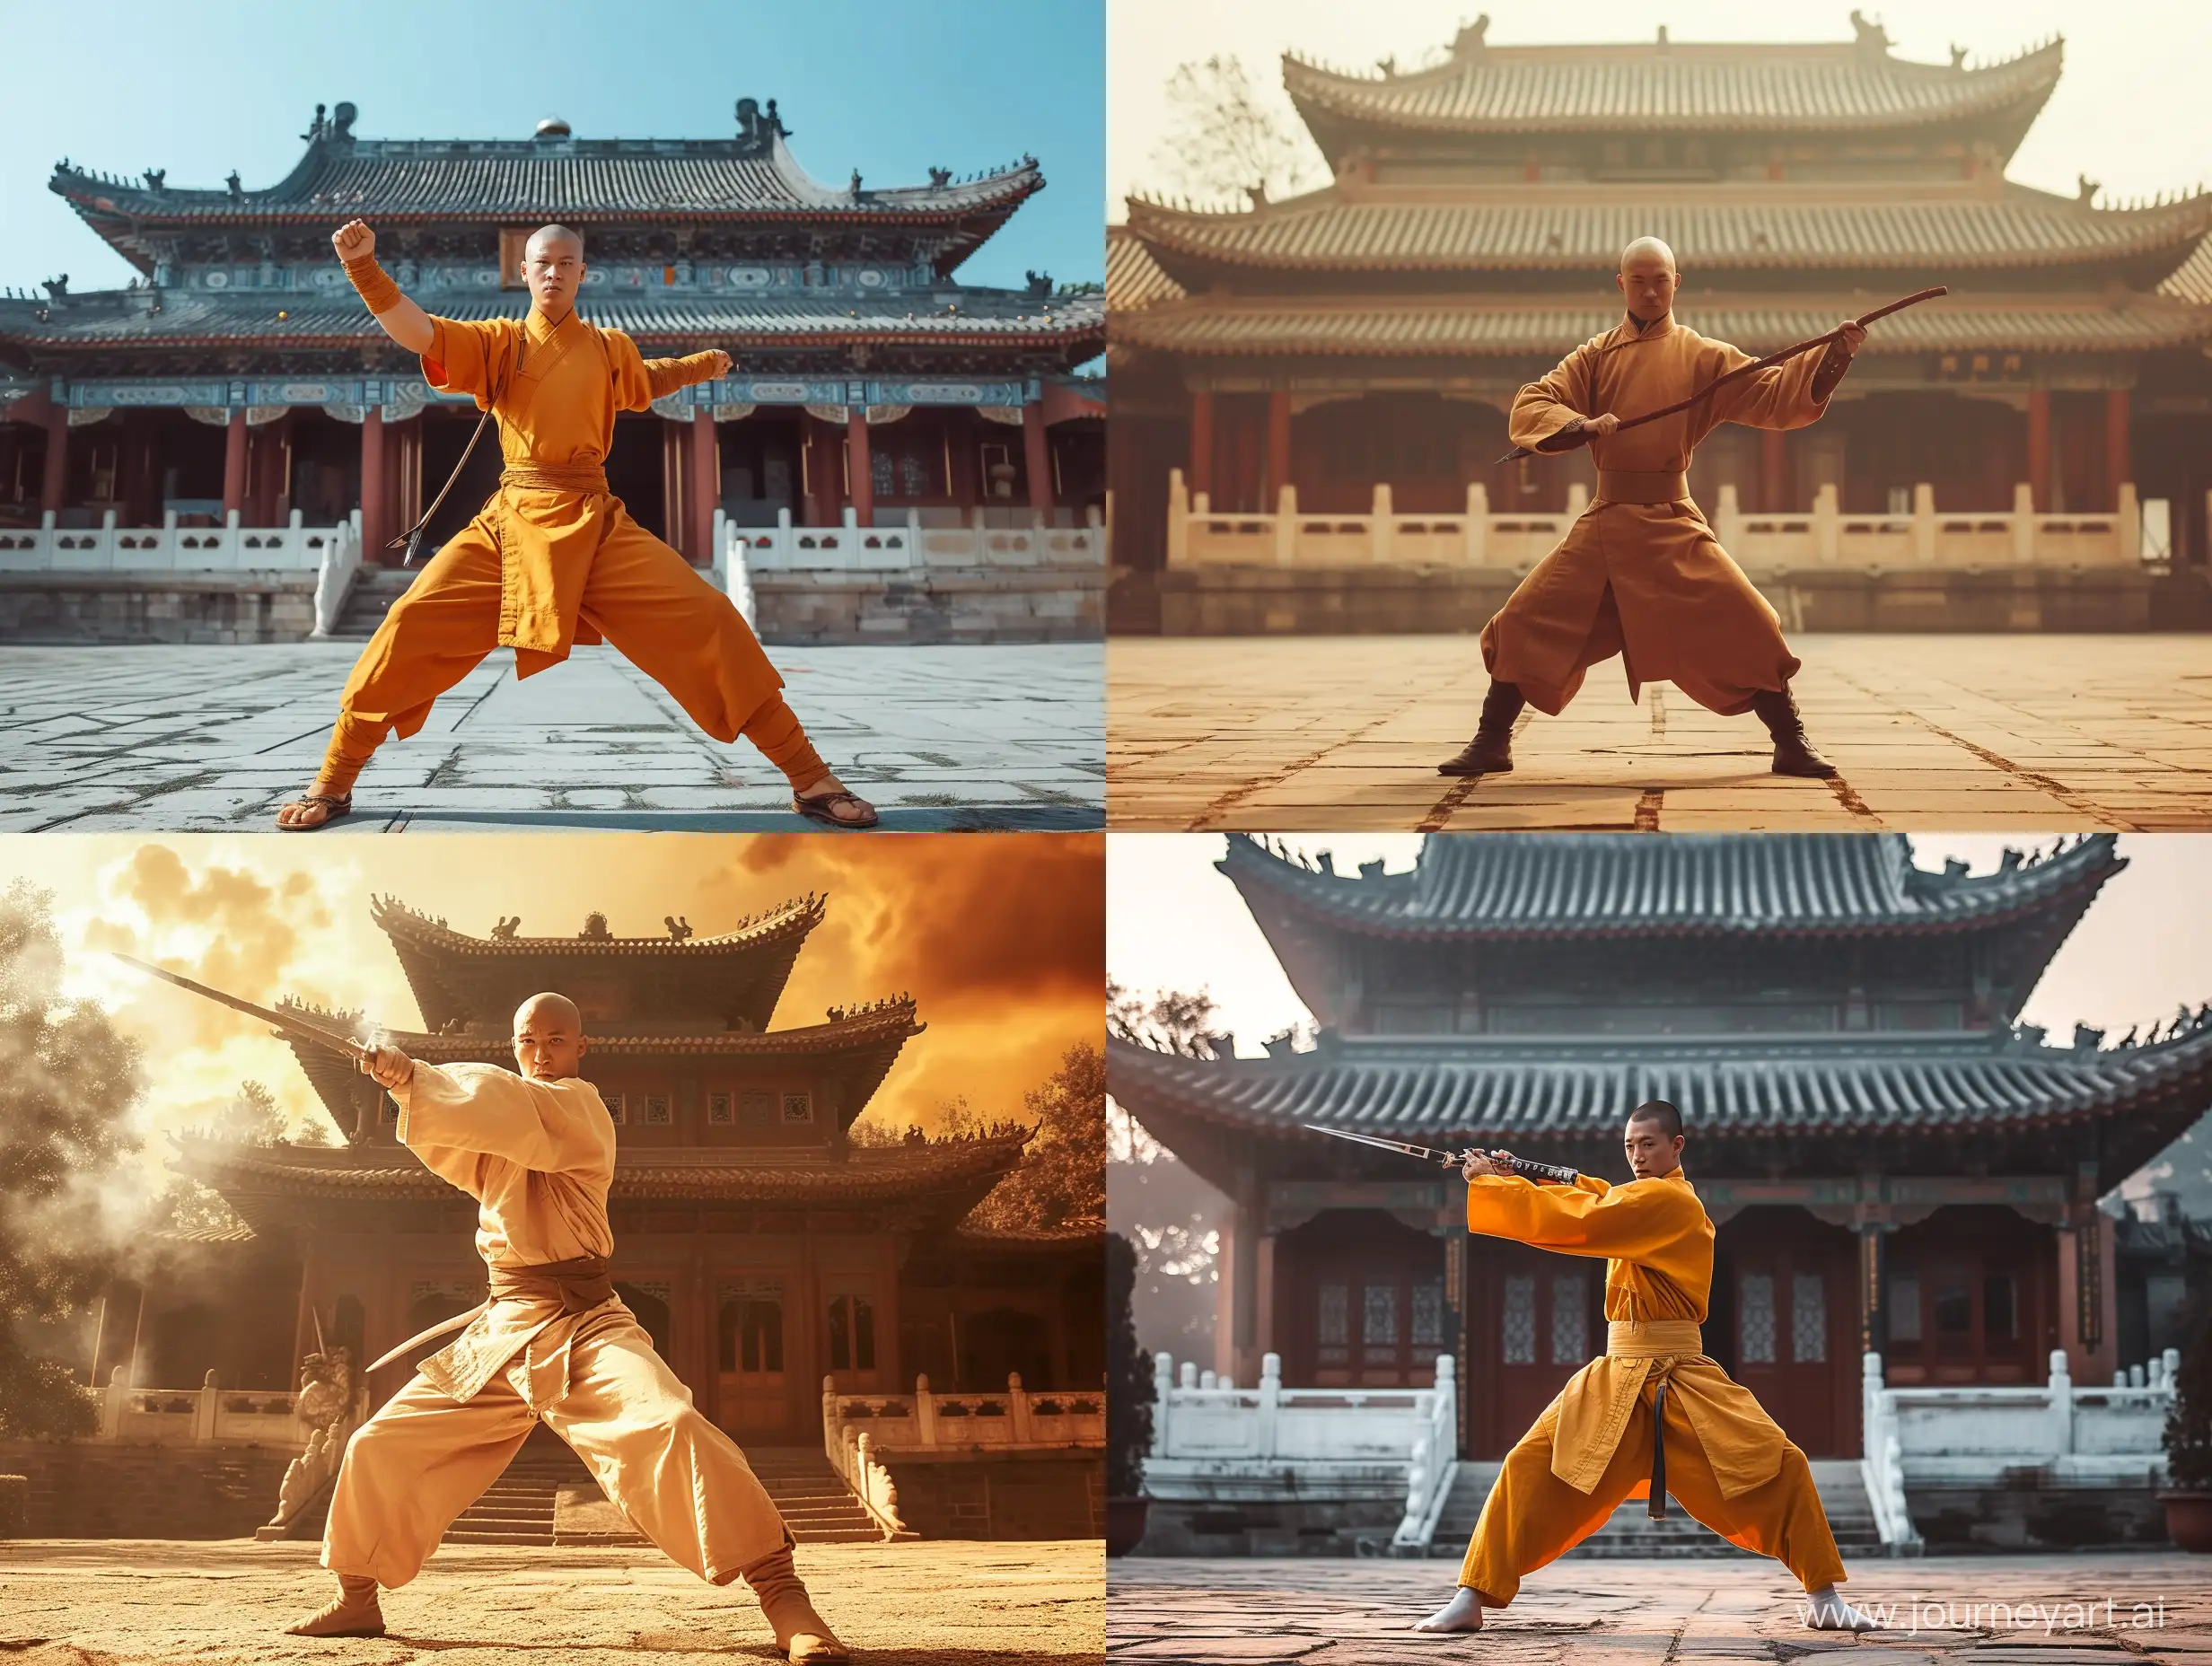 Shaolin-Monk-with-Weapon-Ready-for-Battle-in-Front-of-the-Temple